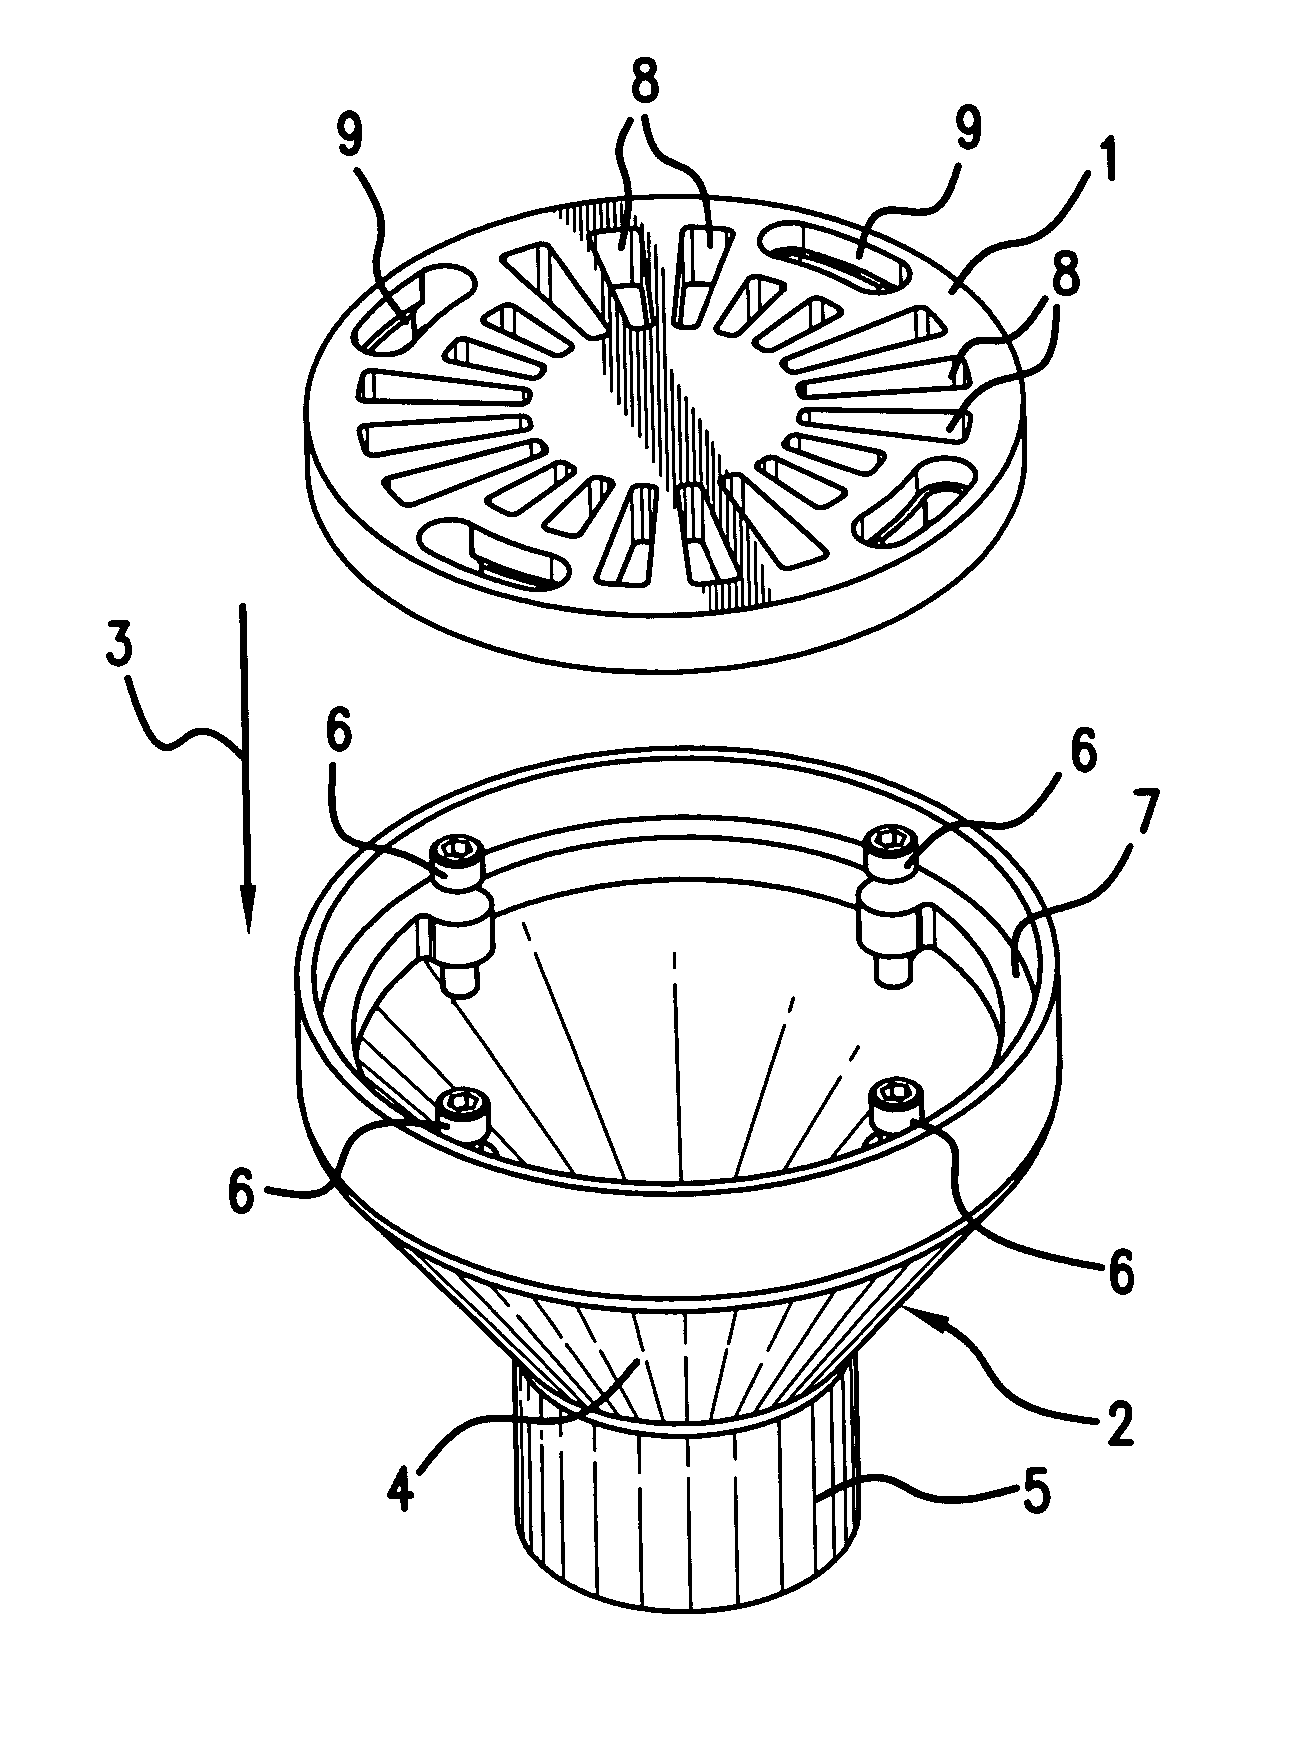 Self-locking grate for deck drain fitting